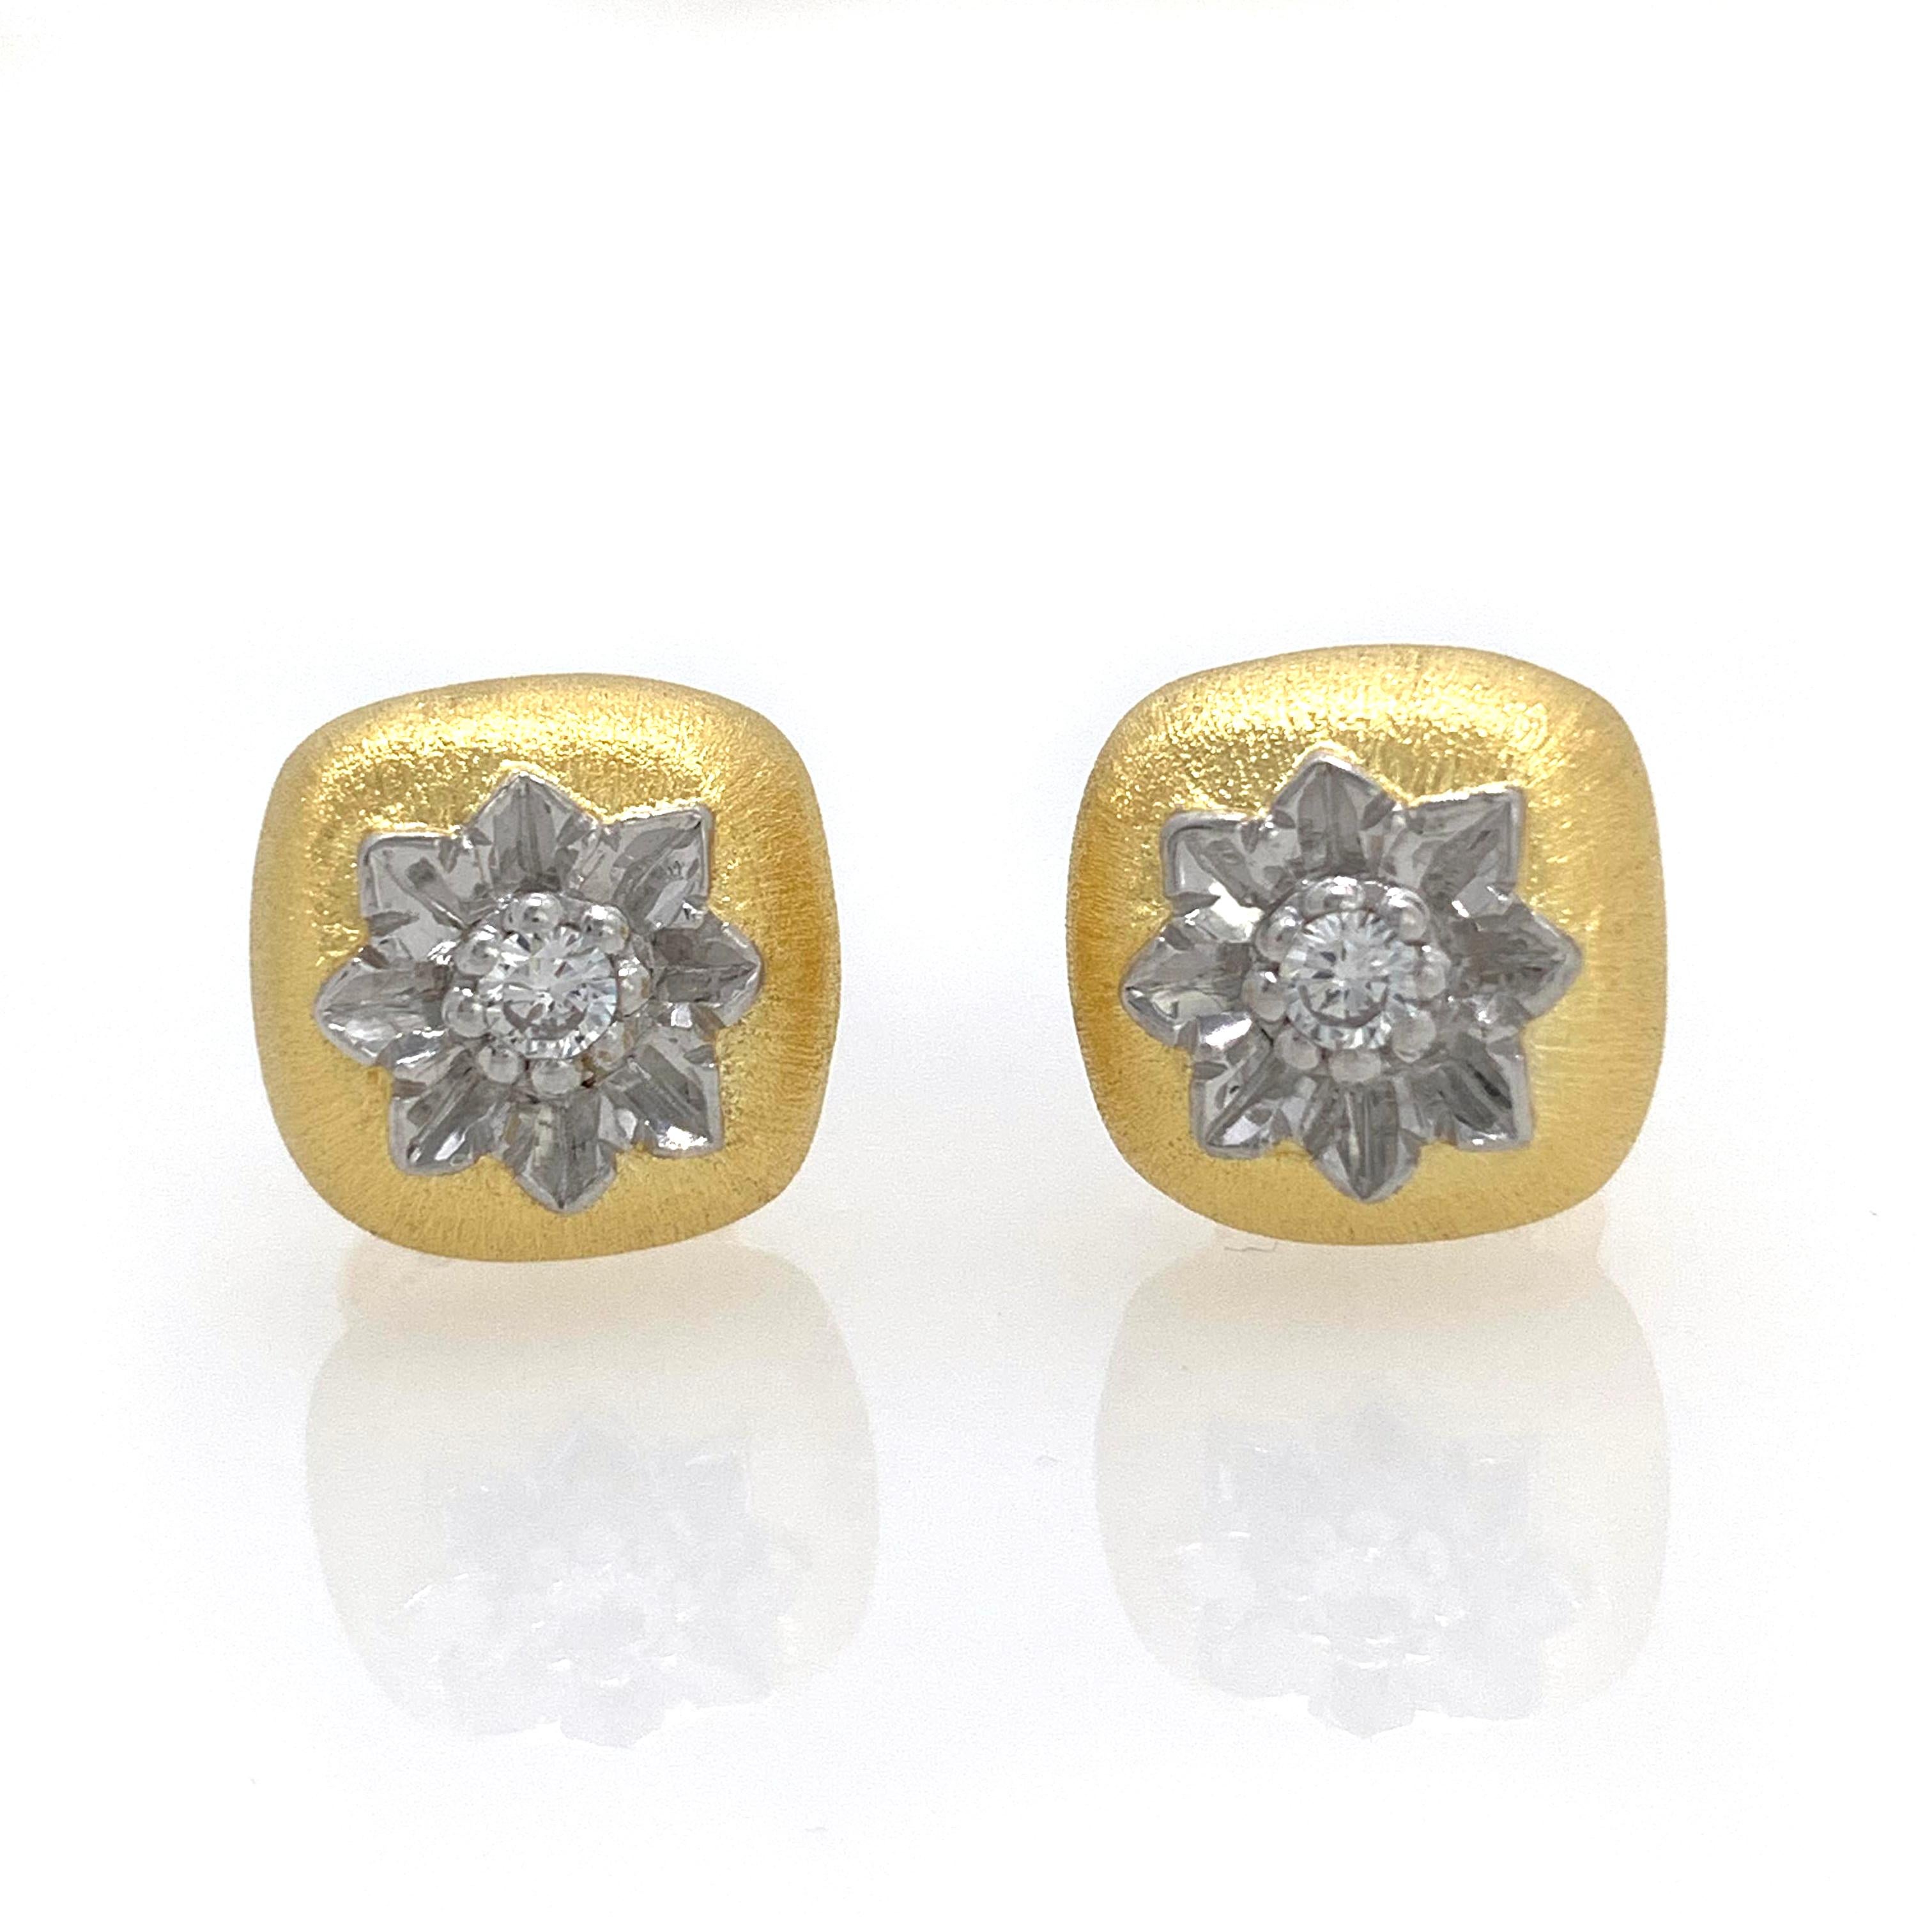 Stunning hand-engraved flower cushion stud earrings handset with simulated diamond.  The earrings feature hand-engraved flower, along with handcrafted Italian Rigato etching technique. Two-tone 18k gold vermeil and platinum rhodium plated sterling